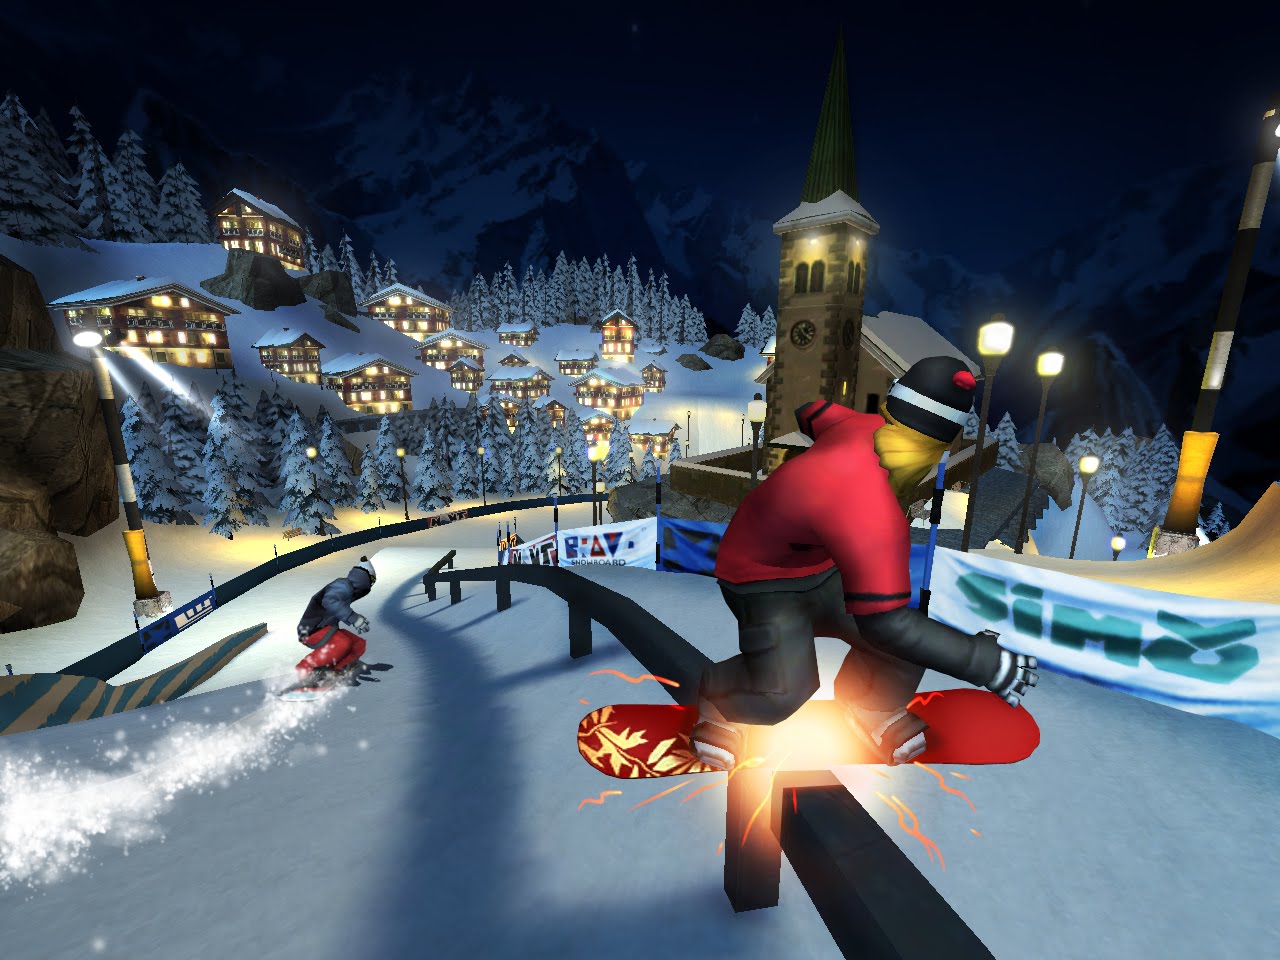 Shaun White Snowboarding - (PlayStation 3 PS3) Game And